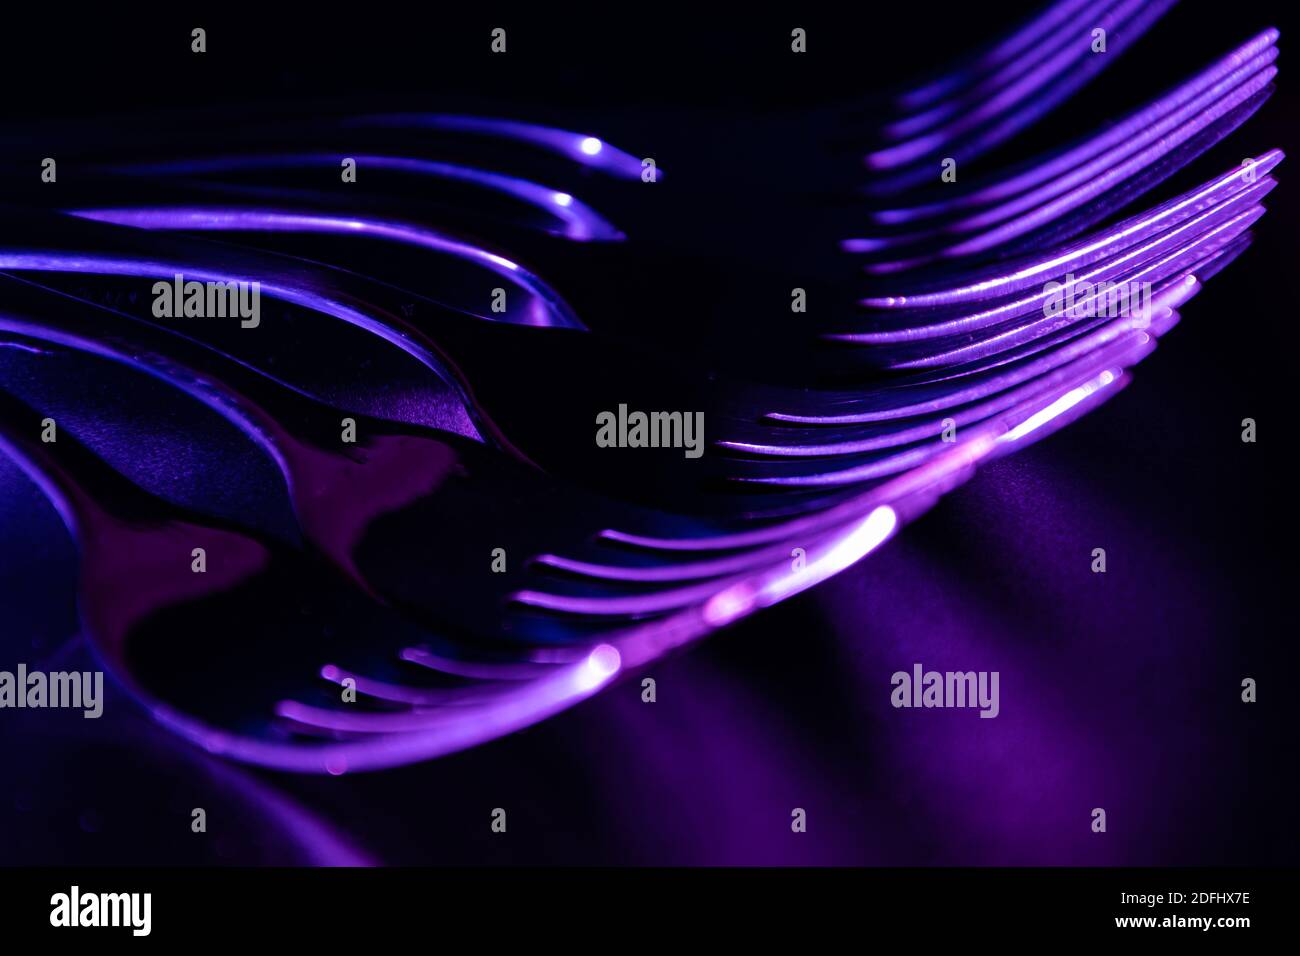 Set of forks in the dark with blue and violet coloured gradient led light.  Stock Photo